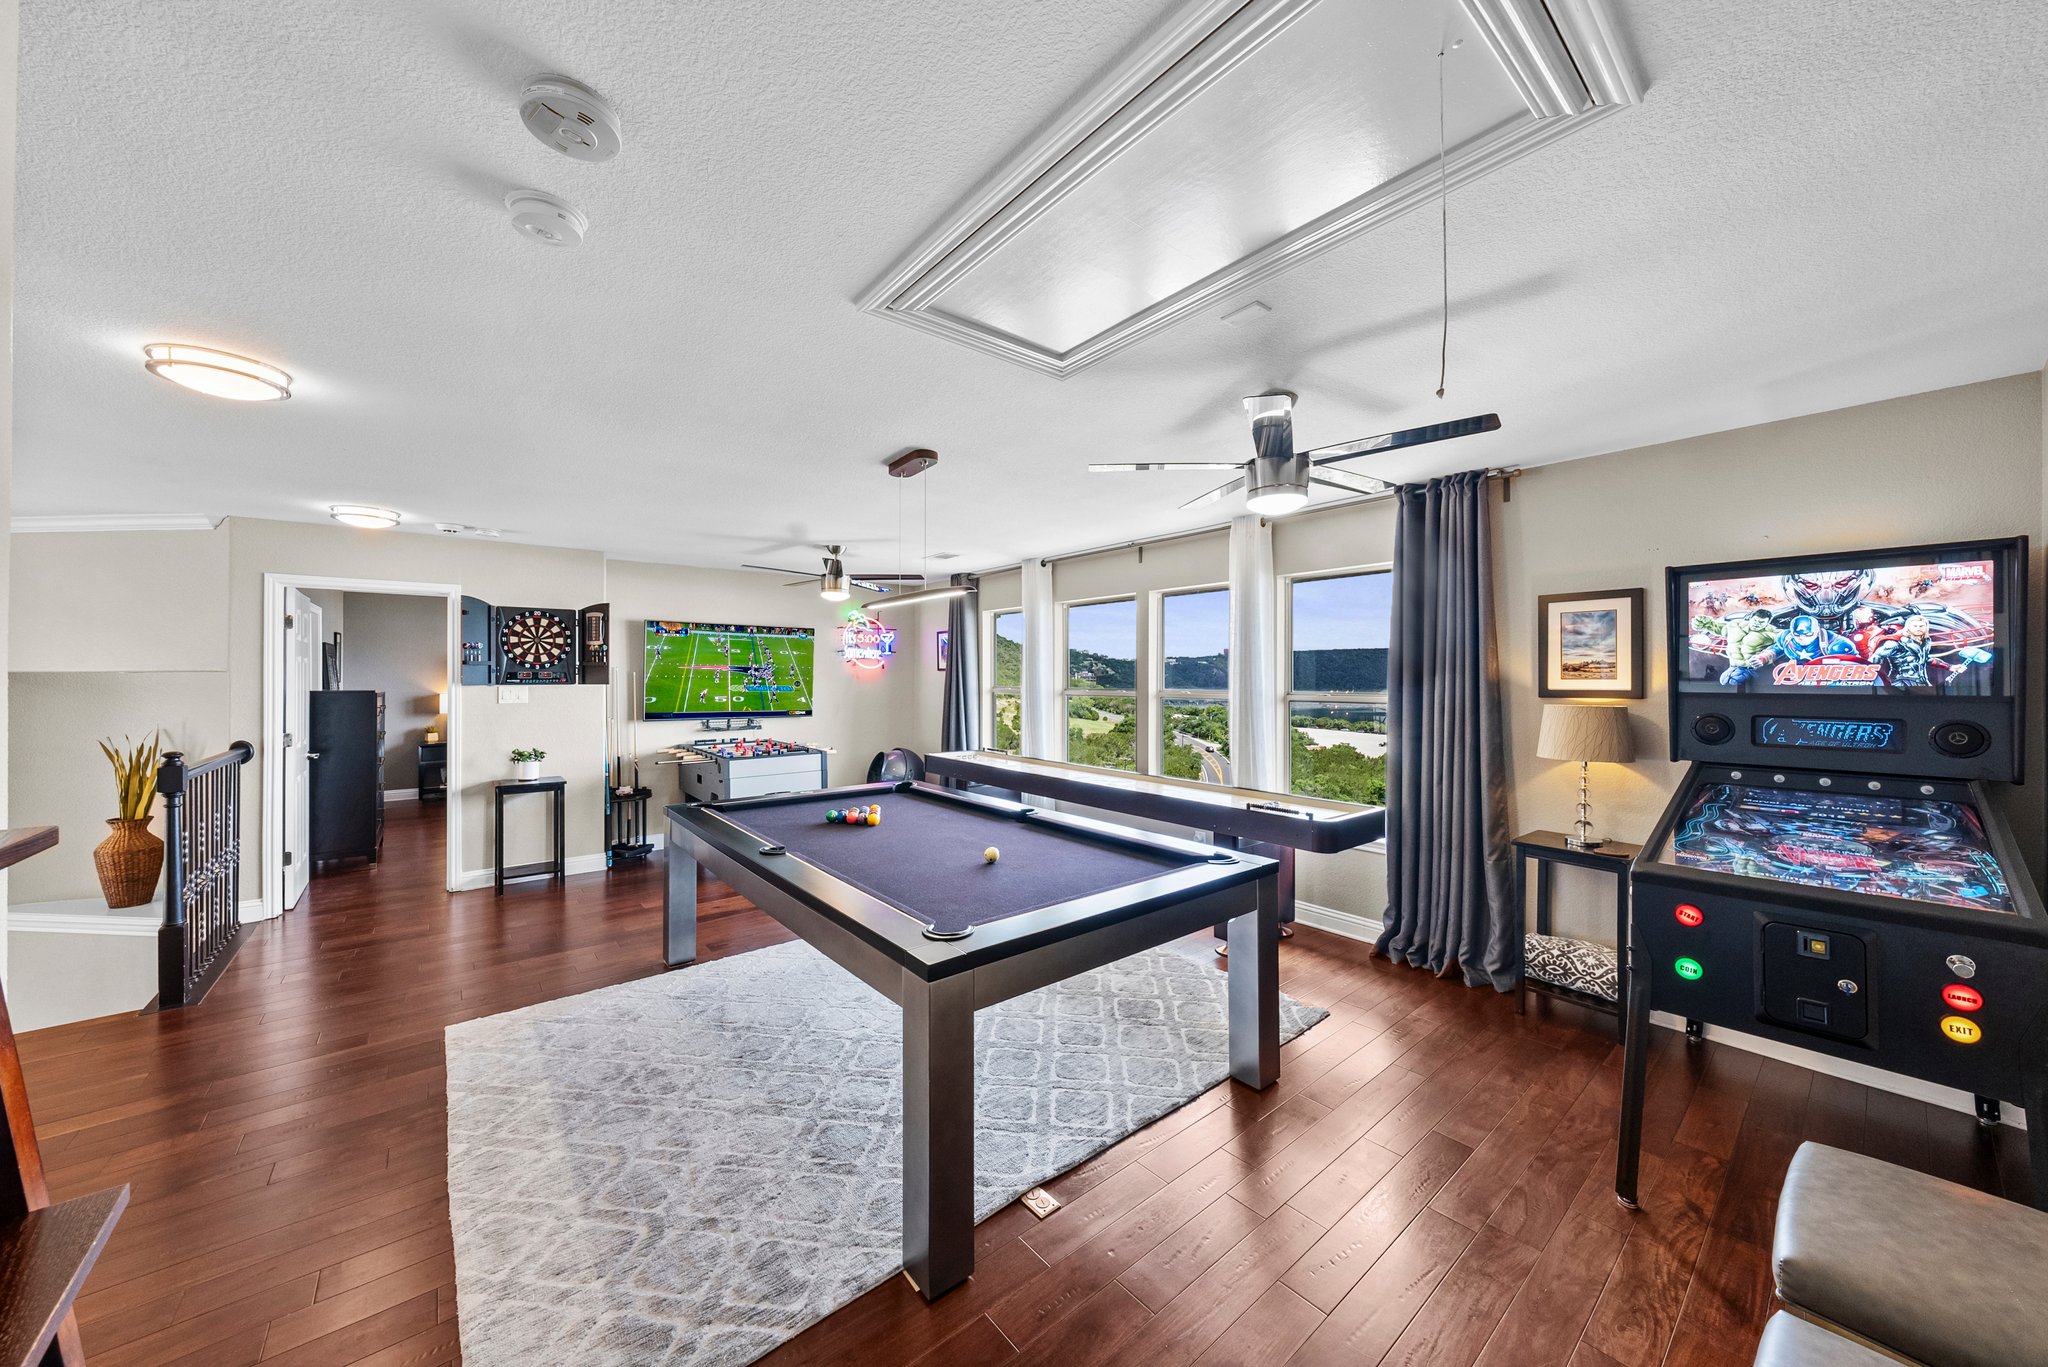 The upper-level living area is quite spacious and offers incredible views of Lake Travis